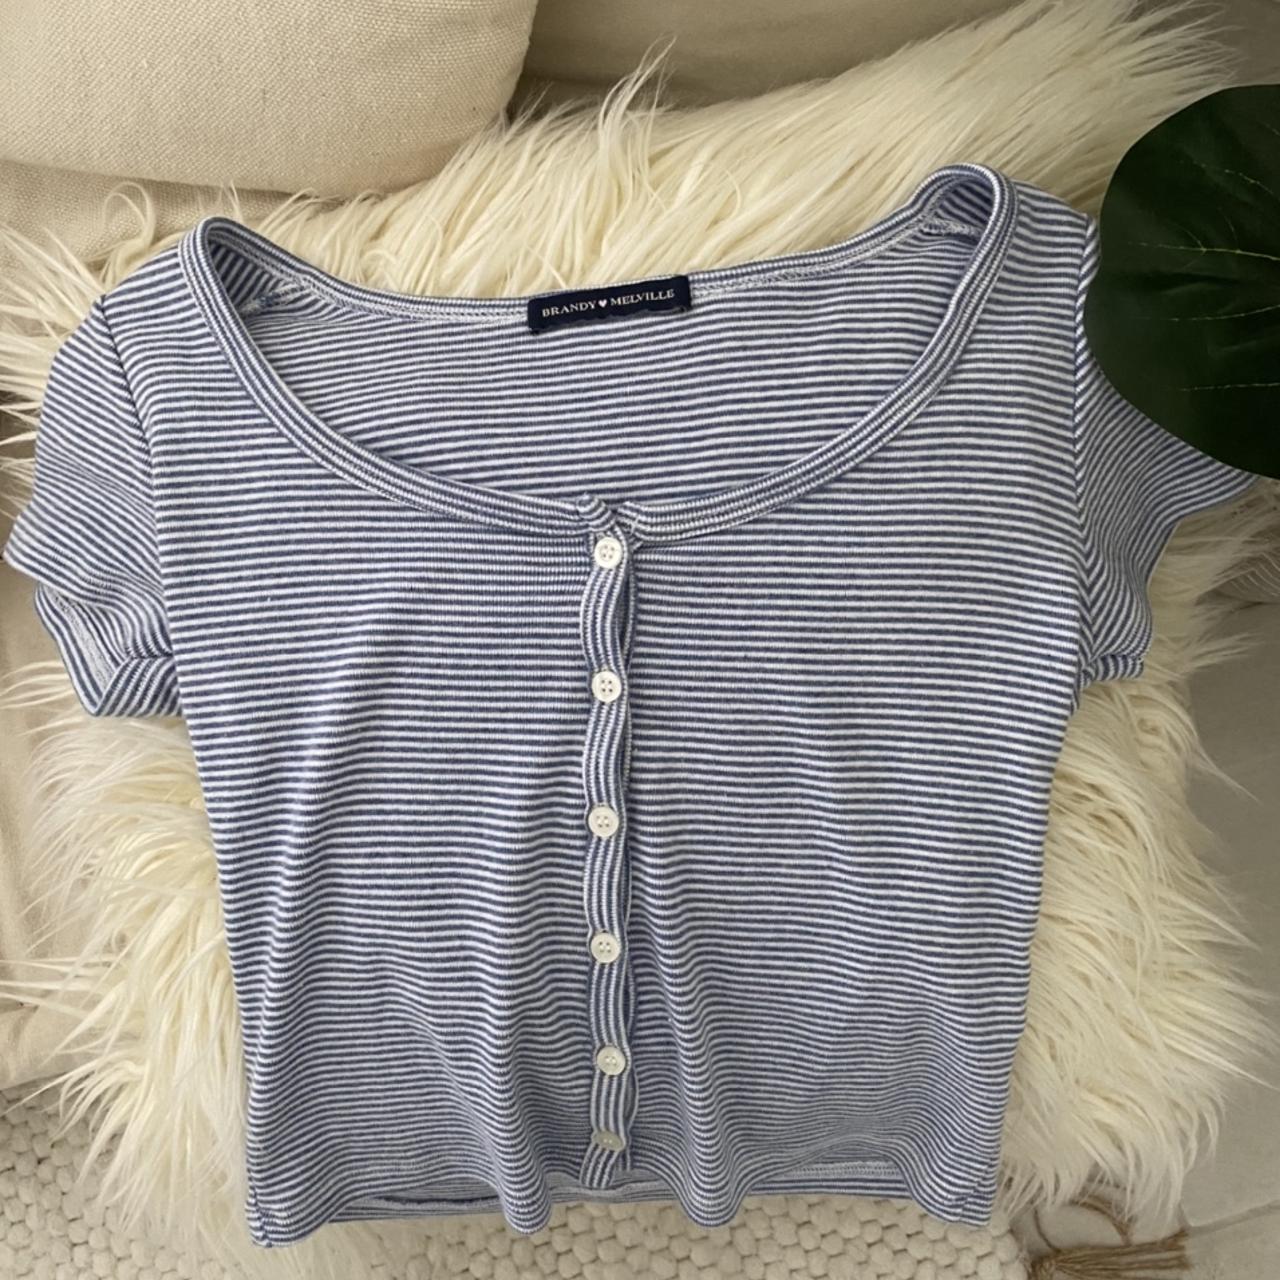 Zelly Stripe Top  Striped top, Brandy melville outfits summer